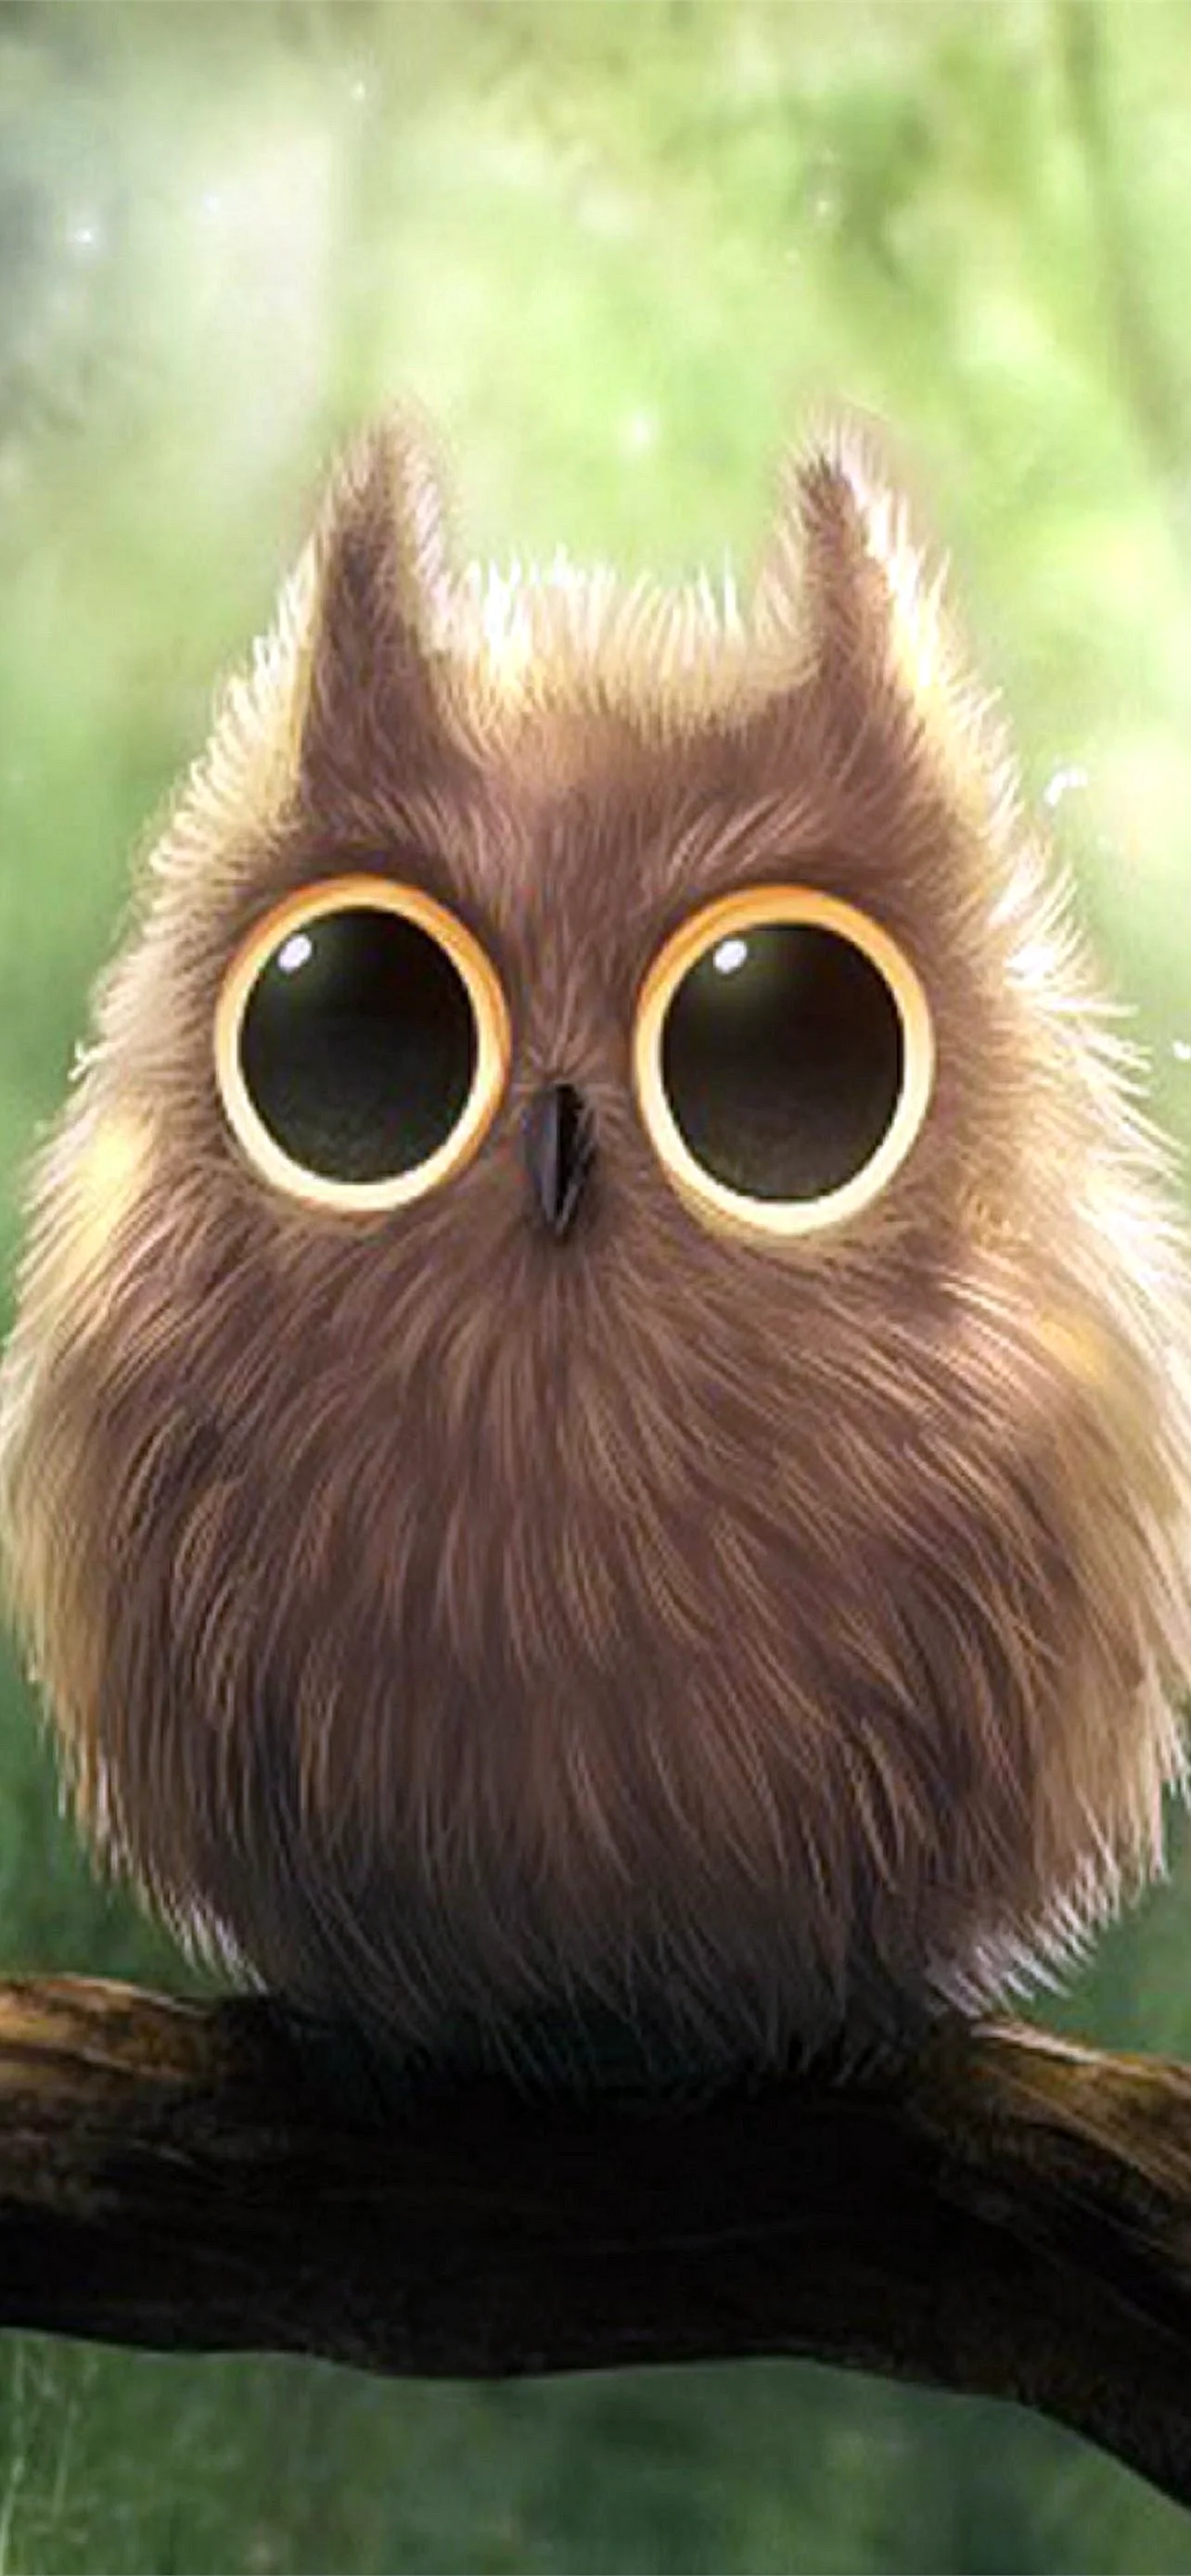 Owl Cave Wallpaper for iPhone 12 Pro Max